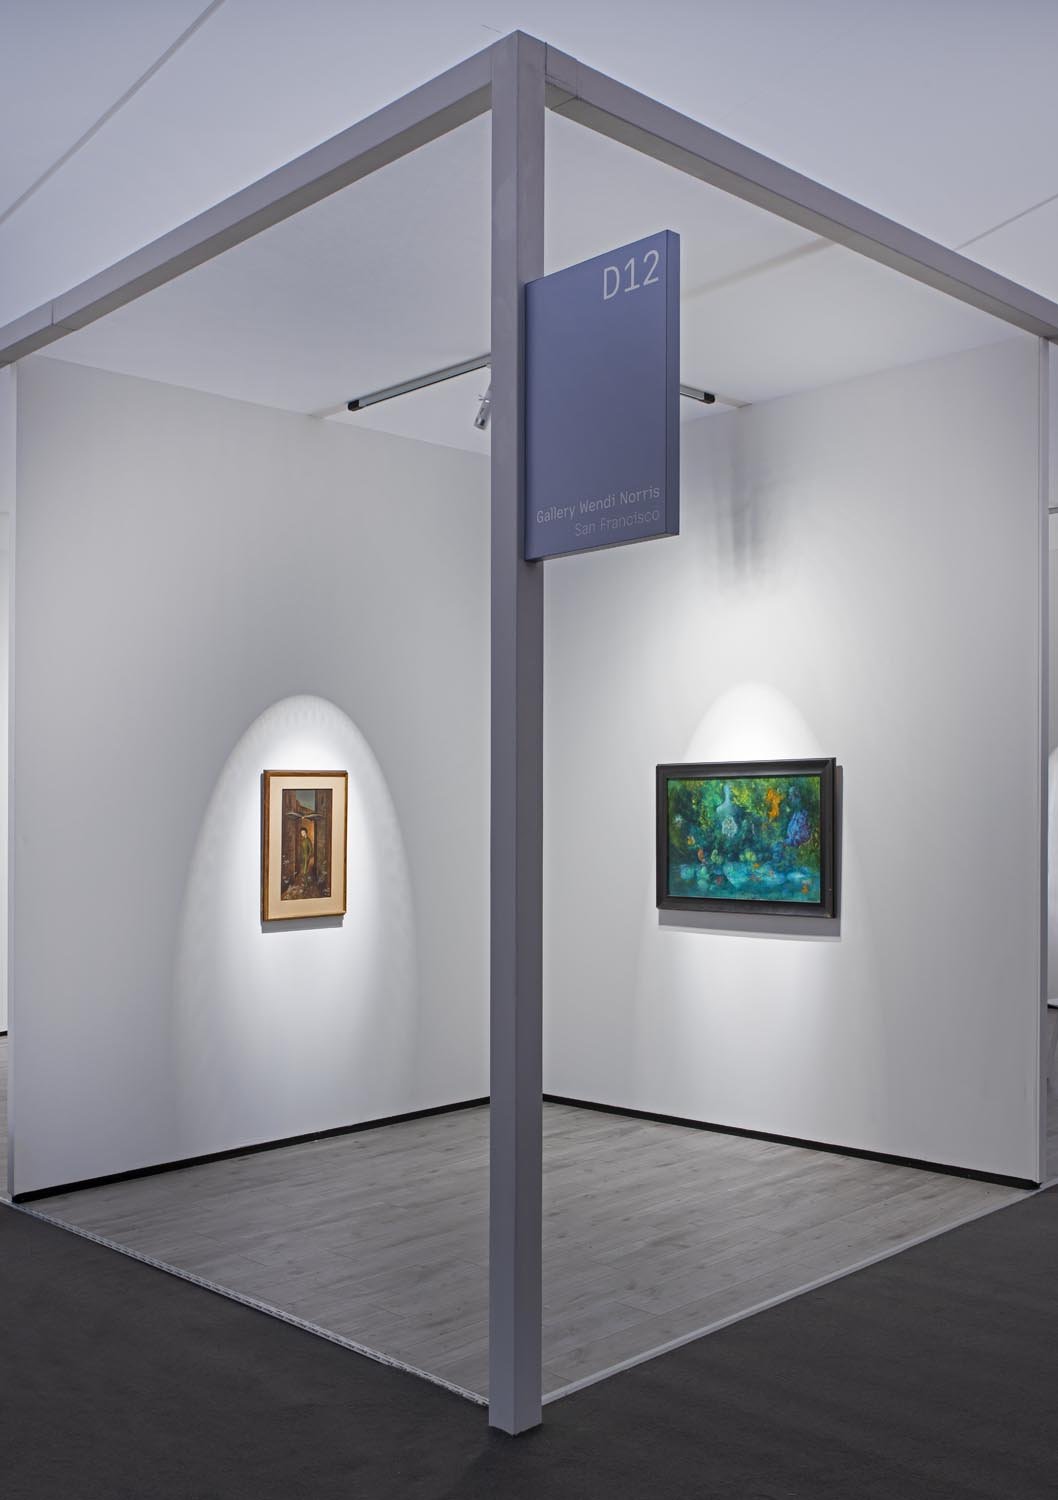  Frieze Masters 2022 ,  installation view, Gallery Wendi Norris, Booth D12, The Regent's Park, London, UK, October 12-16, 2022. Photo by Alex Fox 